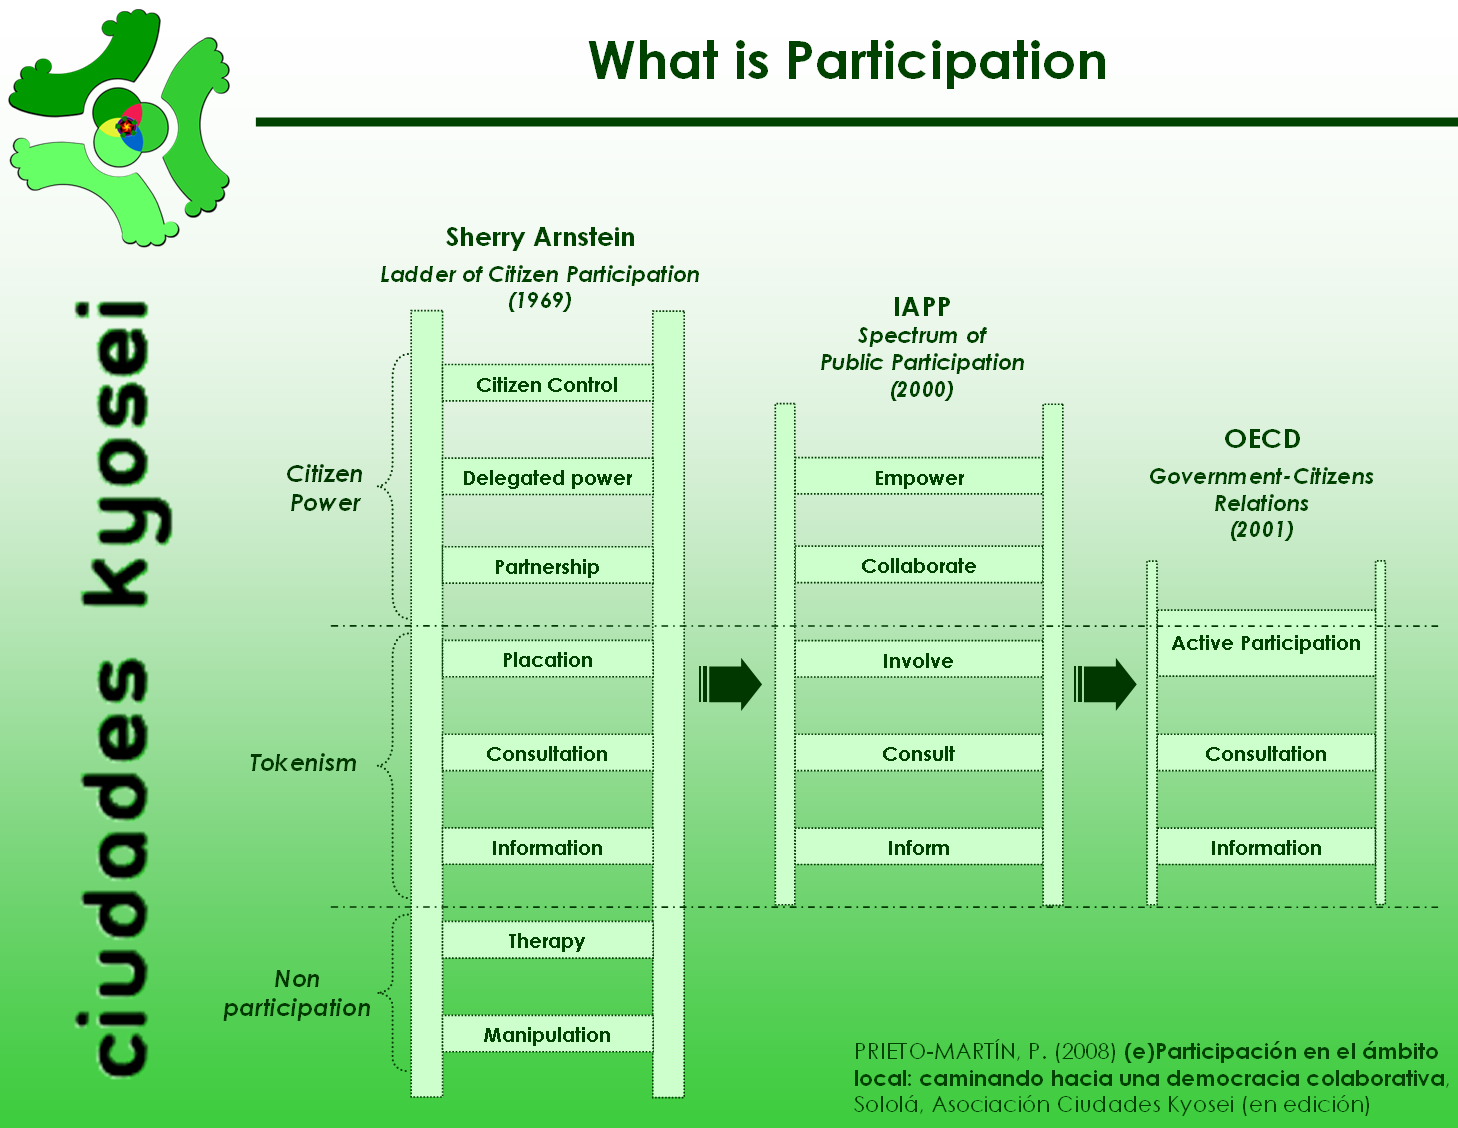 Evolution of the views on what participation is